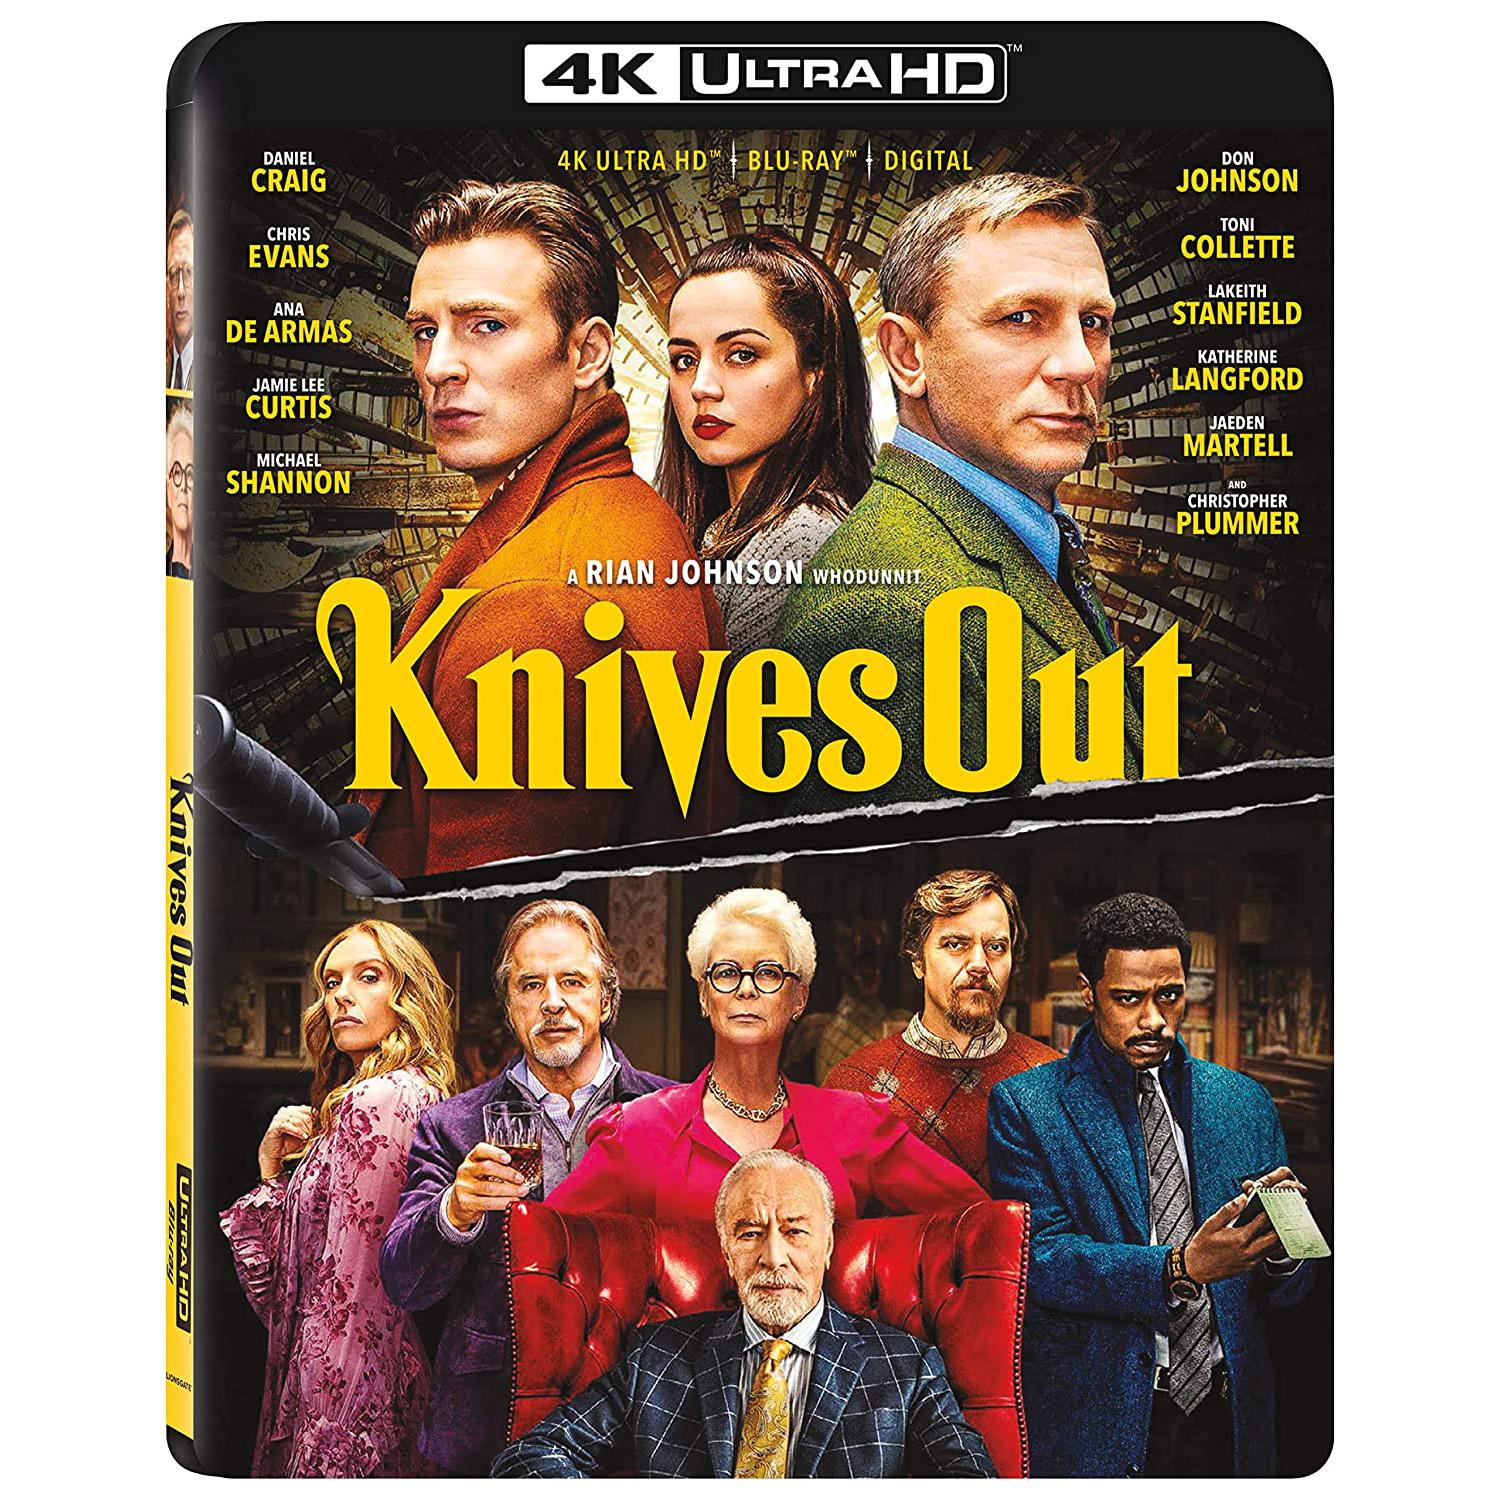 Knives Out 4K Blu-ray for $9.99